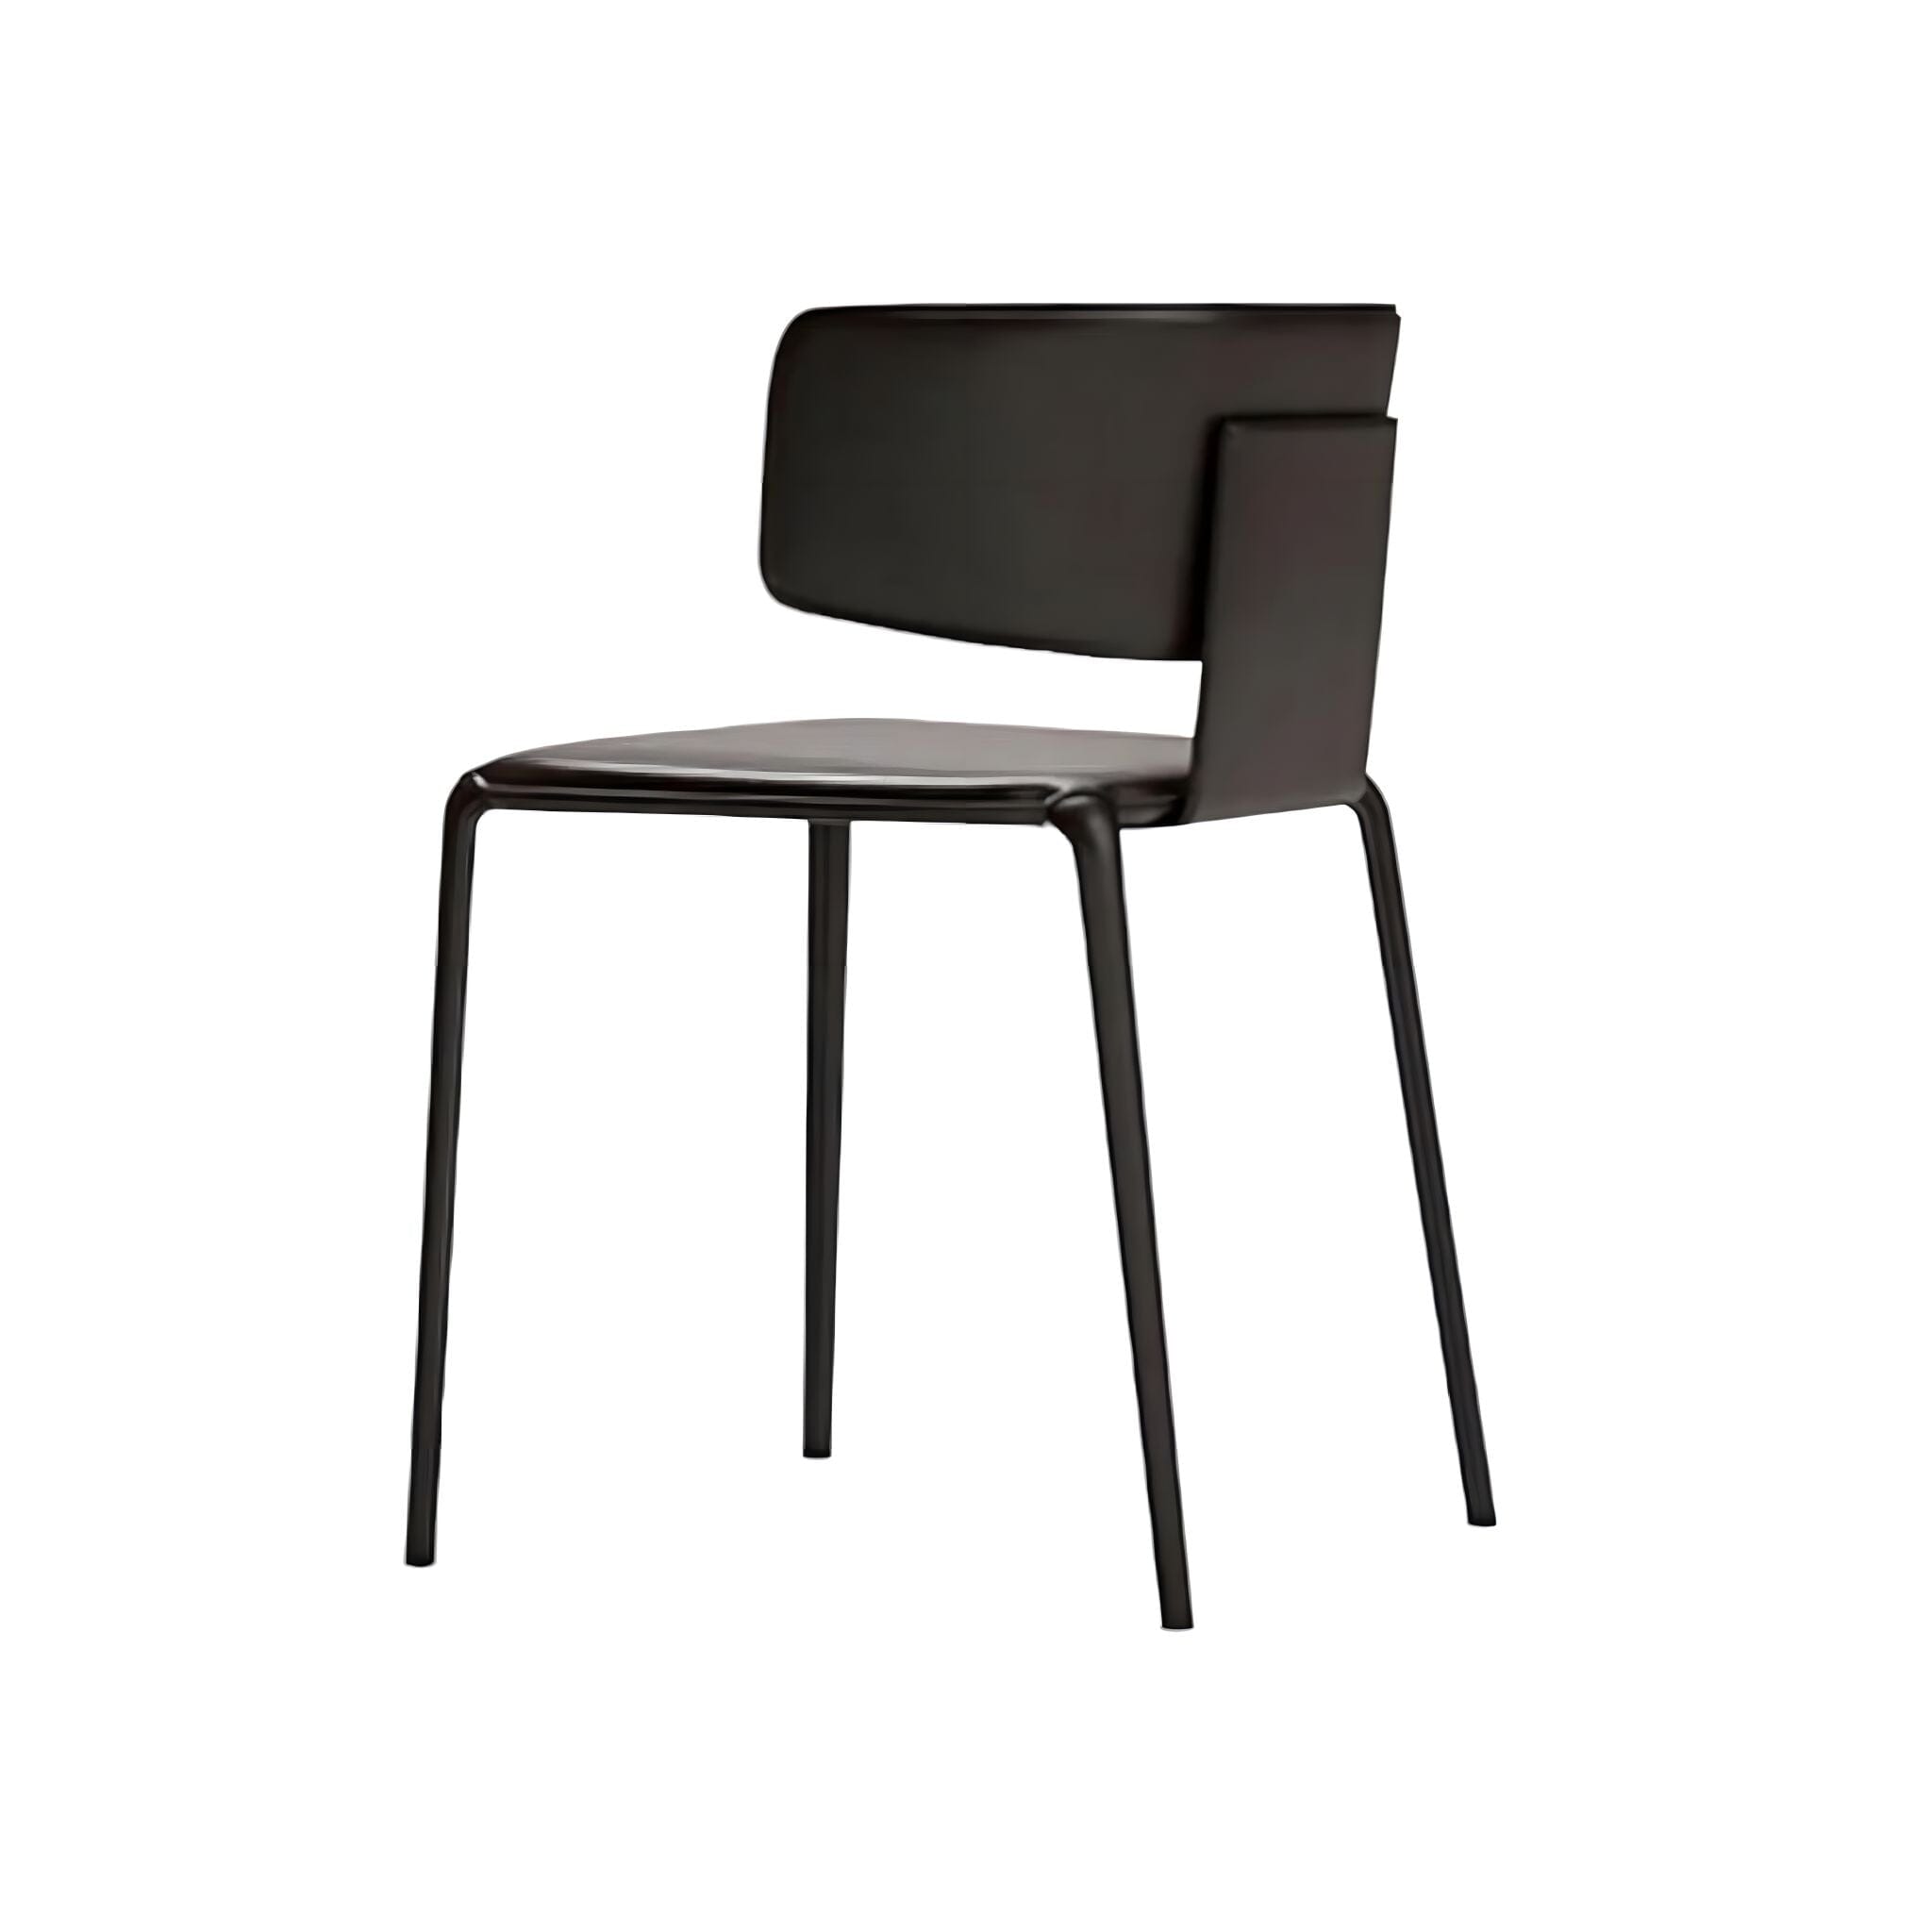 Sylvie Dining Chairs Chair Black 